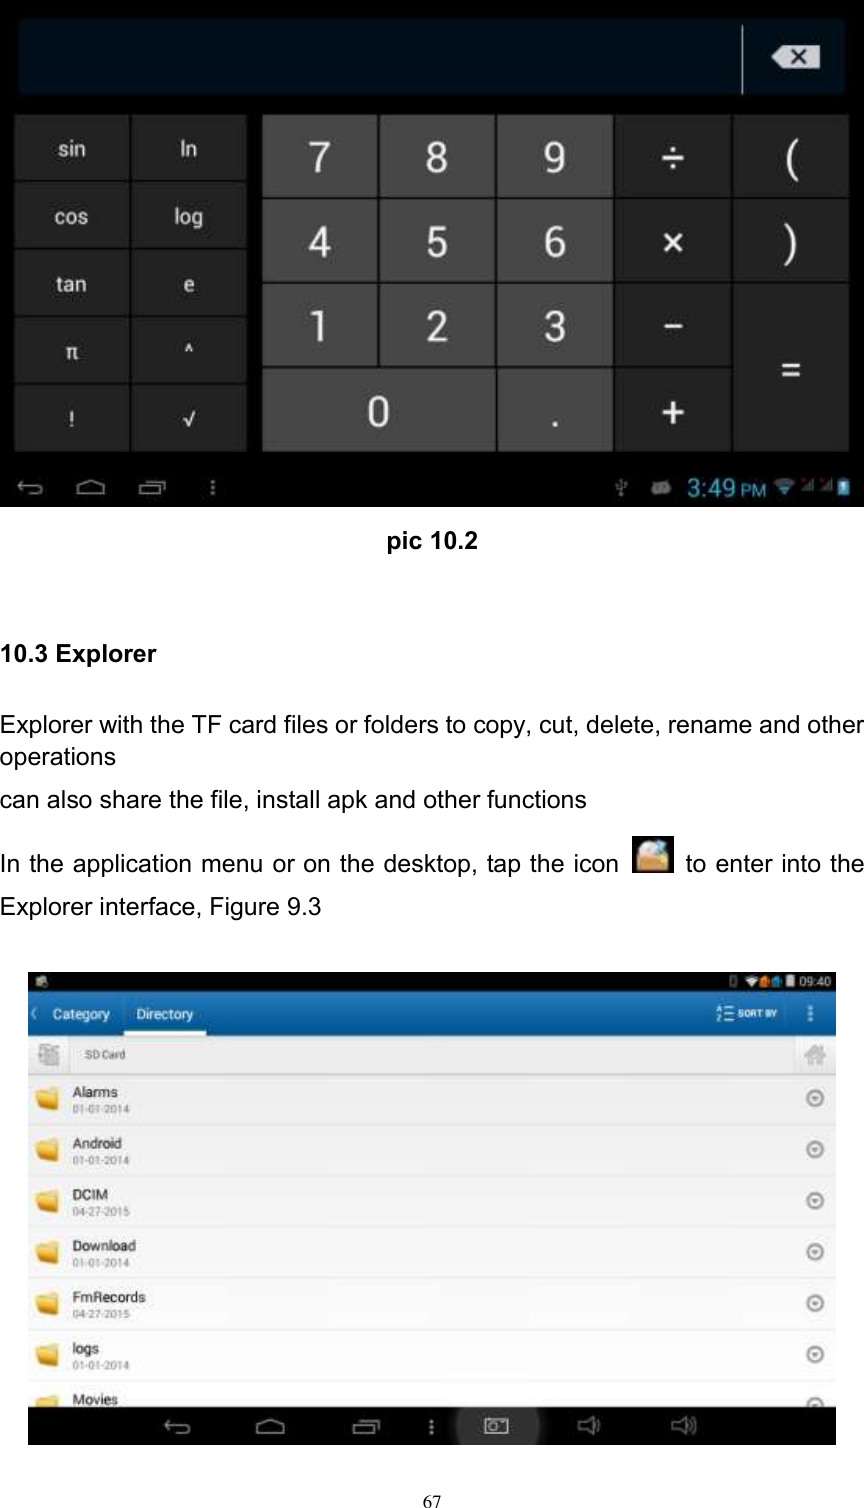      67  pic 10.2  10.3 Explorer Explorer with the TF card files or folders to copy, cut, delete, rename and other operations can also share the file, install apk and other functions In the application menu or on the desktop, tap the icon    to enter into the Explorer interface, Figure 9.3   